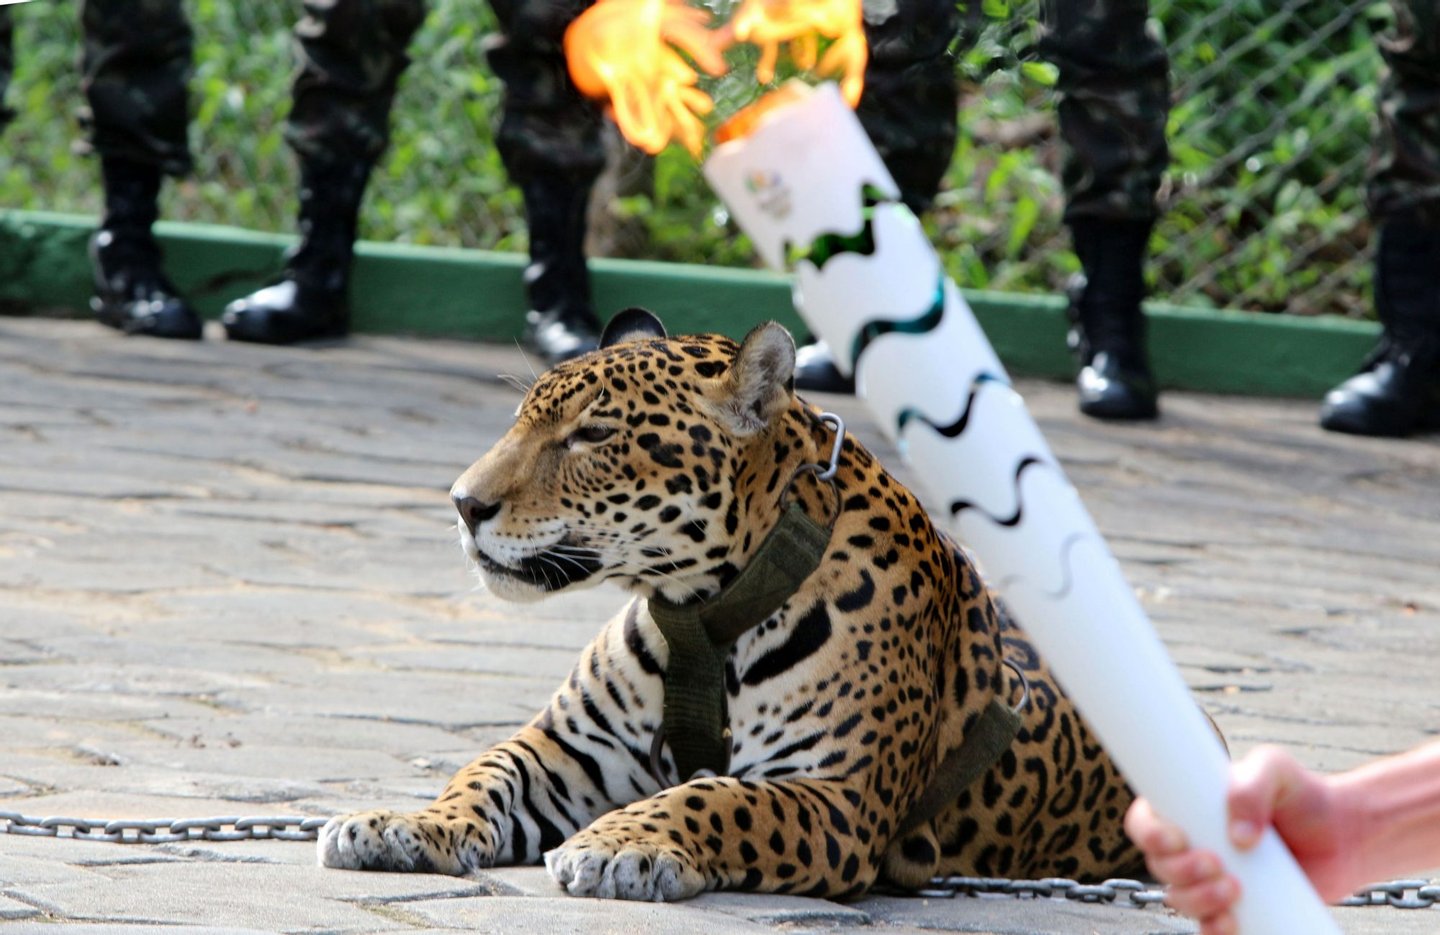 The Olympic Torch, hold by an athlete, is seen by a jaguar --symbol of Amazonia-- during a ceremony in Manaus, northern Brazil, on June 20, 2016. The jaguar, who was named Juma and lived in the local zoo, had to be shot dead by soldiers shortly after the ceremony when he escaped and attacked a veterinarian despite having been hit four times with tranquilizing darts. / AFP / Diario do Amazonas / Jair Araujo (Photo credit should read JAIR ARAUJO/AFP/Getty Images)